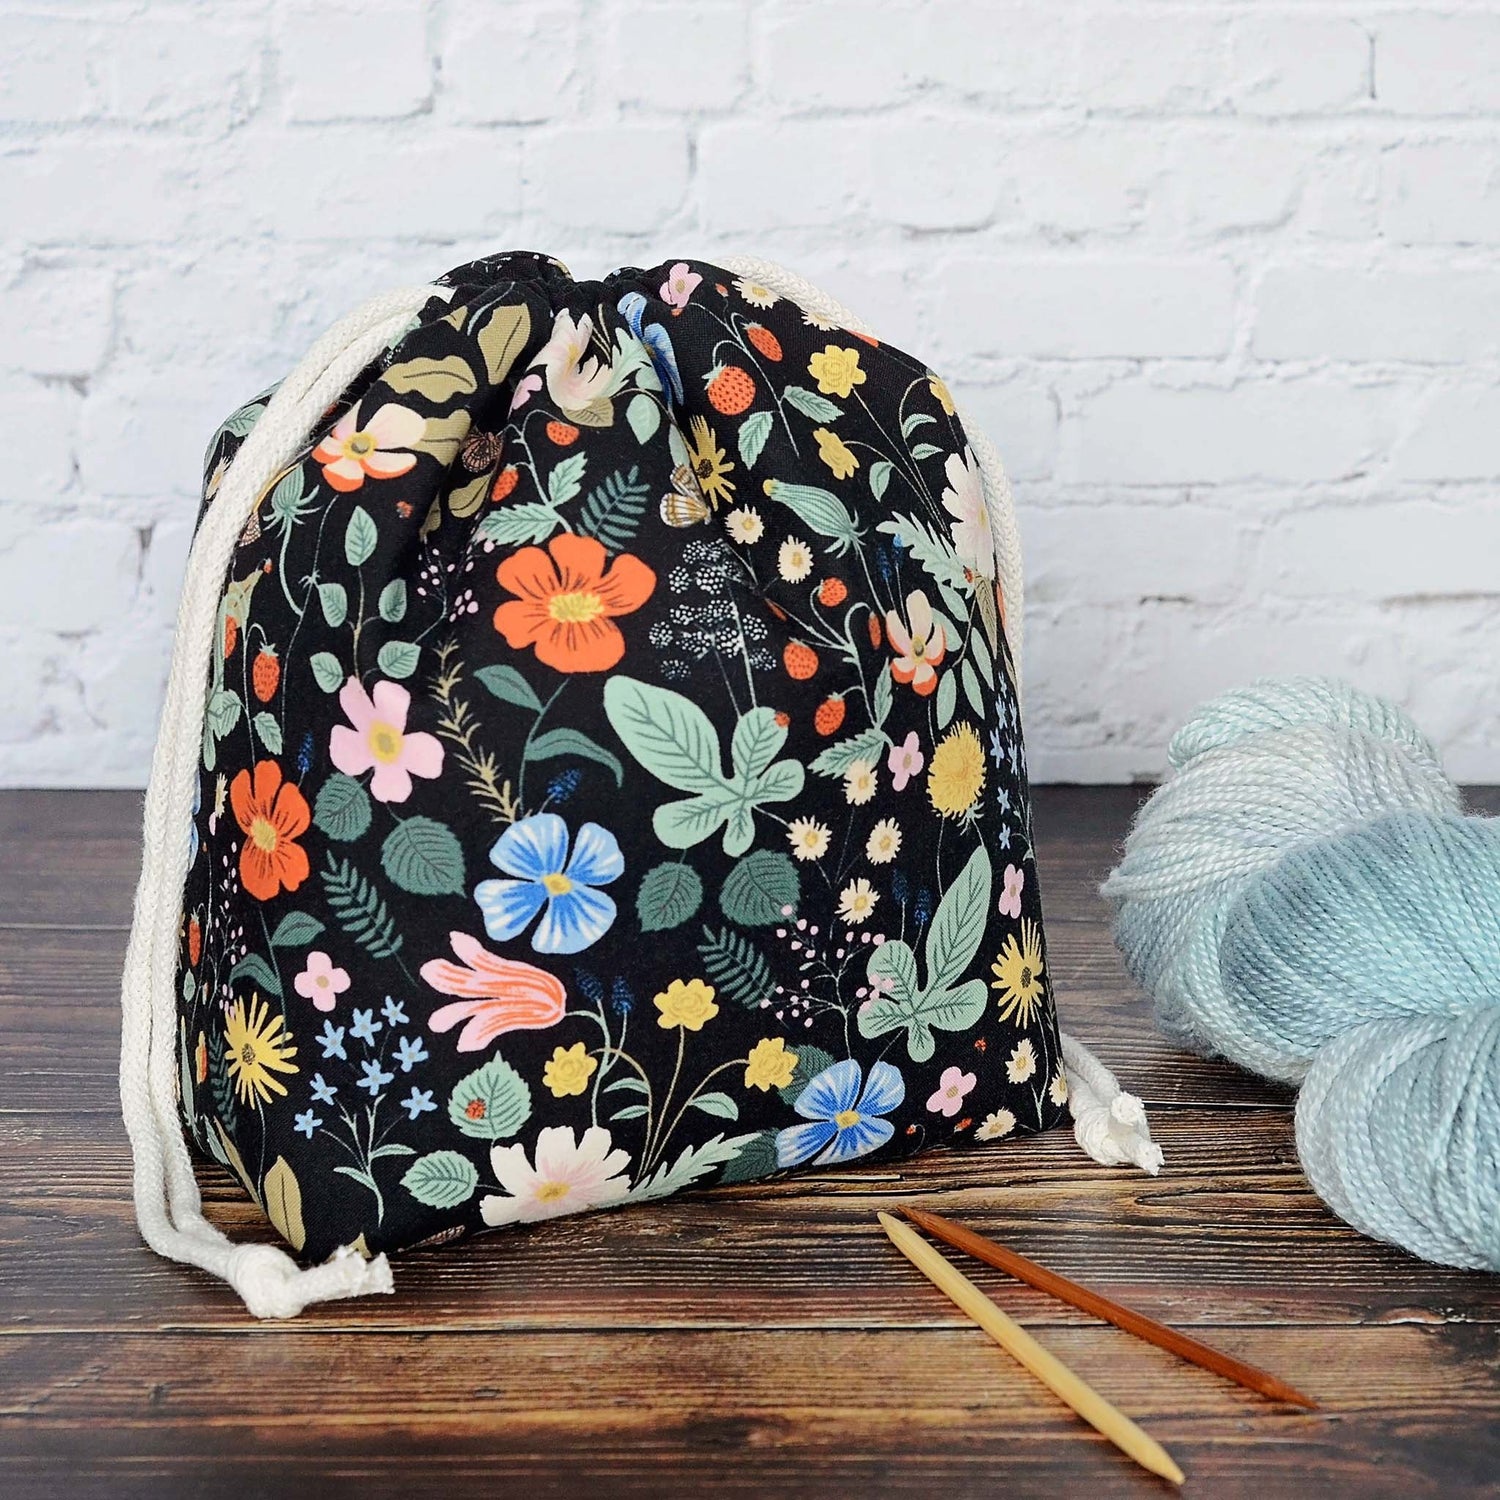 Black floral knitting project bag in Strawberry Fields fabric by Rifle Paper Co.  Lined in a pretty pink floral with pockets.  Made in Canada by Yellow Petal Handmade.